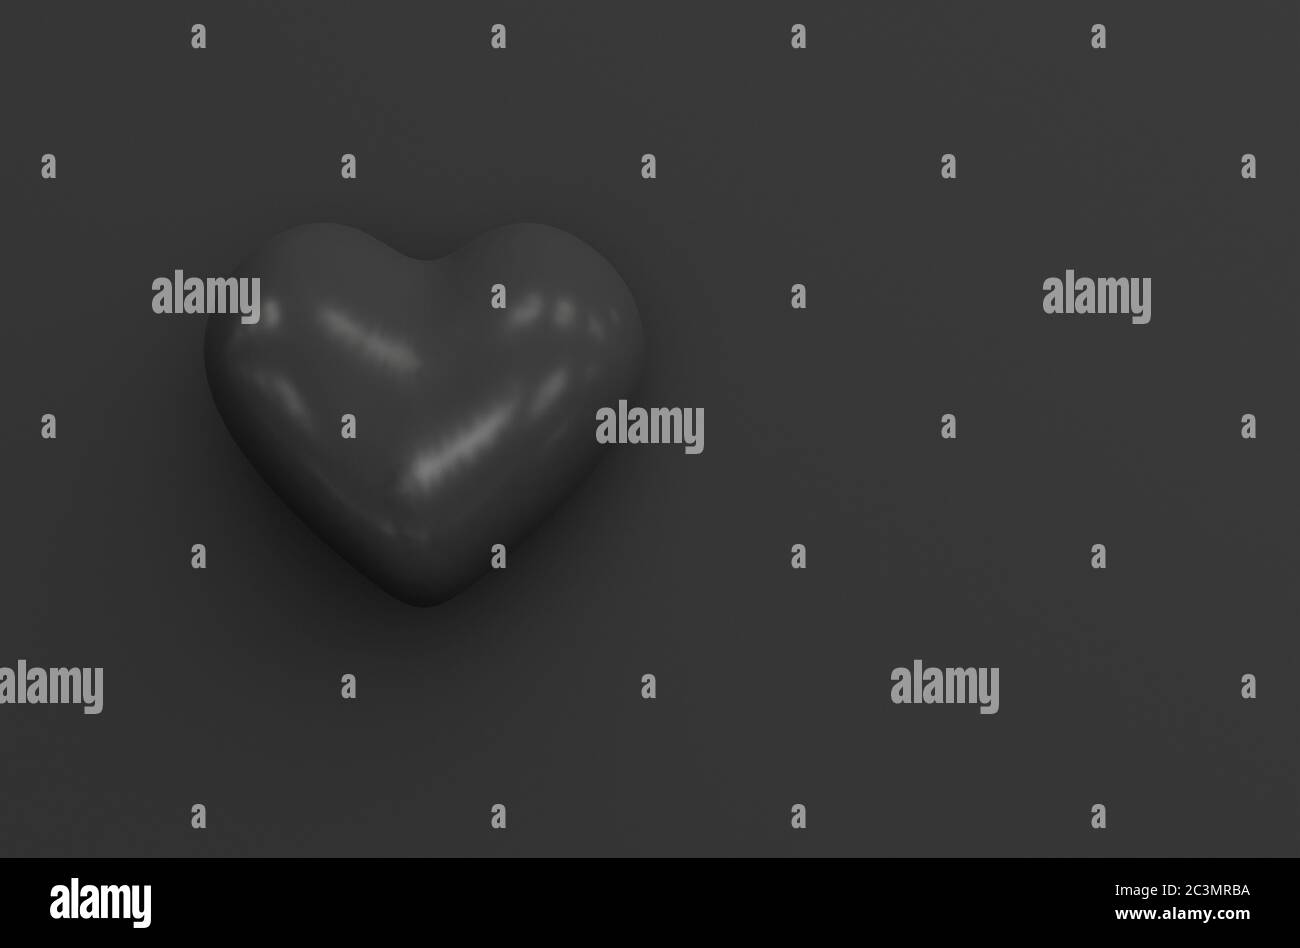 Single black heart shape on a black background. Top view. Monochrome illustration in dark color with copy space. 3D render Stock Photo